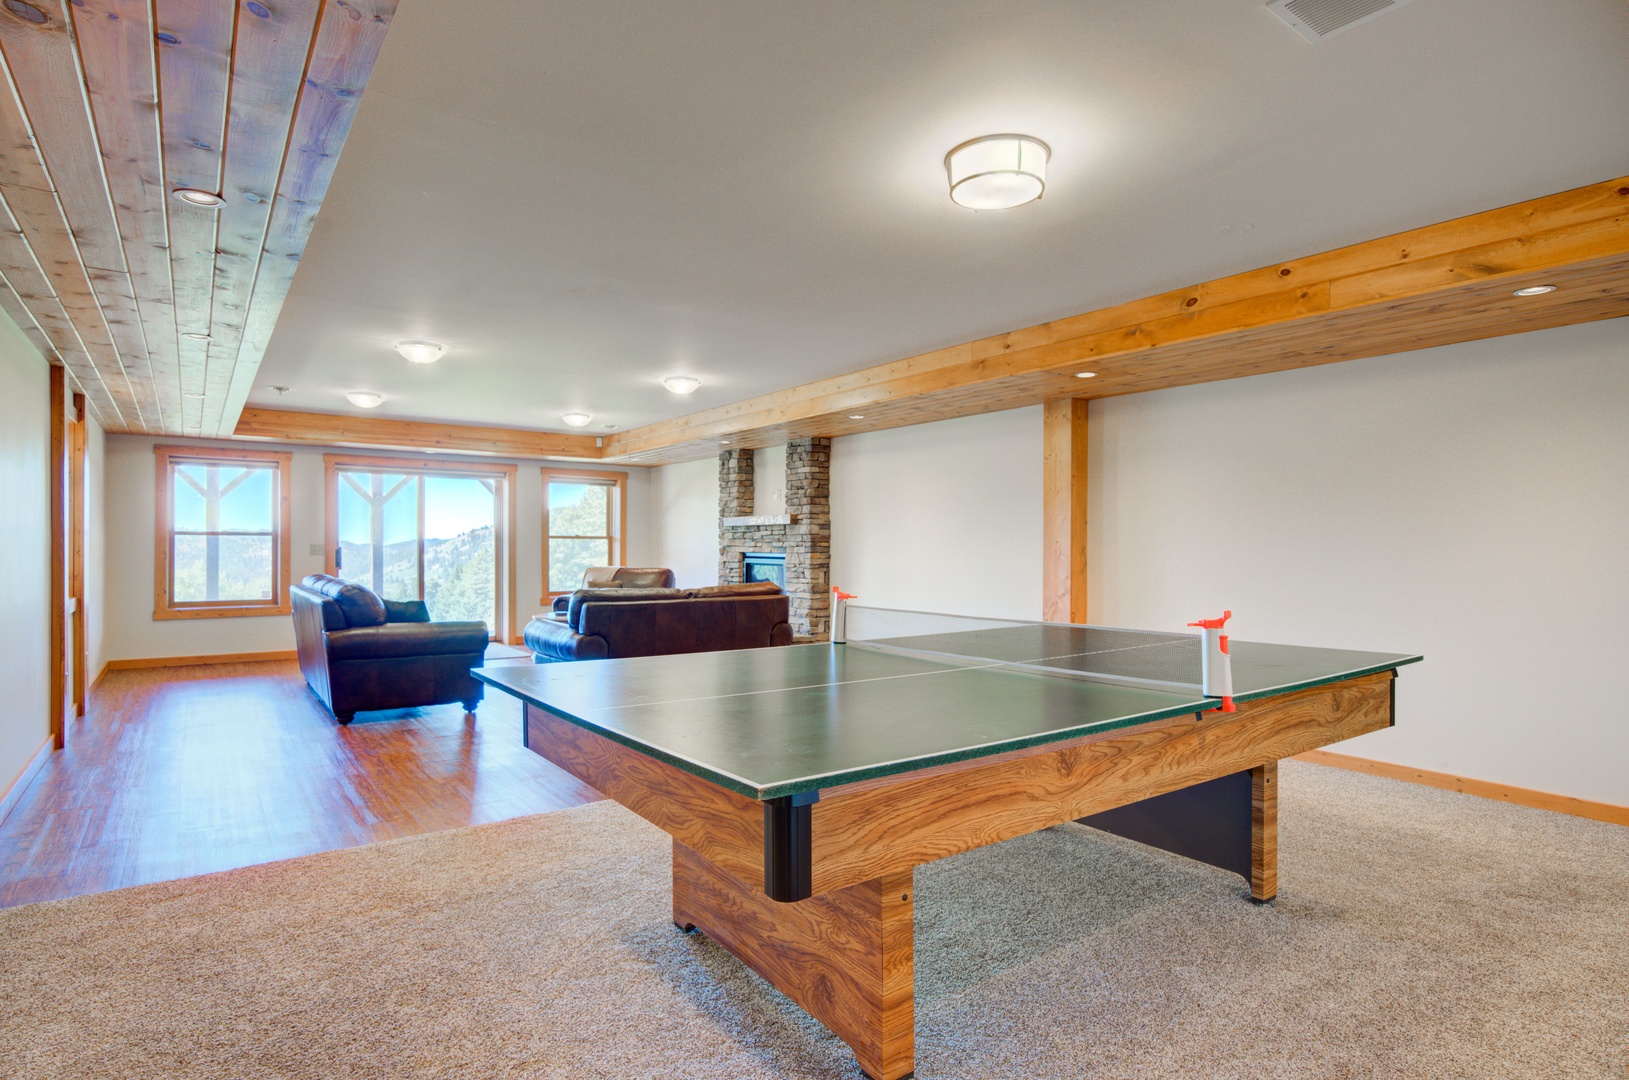 Bozeman Vacation Rentals, The Canyon Lookout - Game area for fun times!